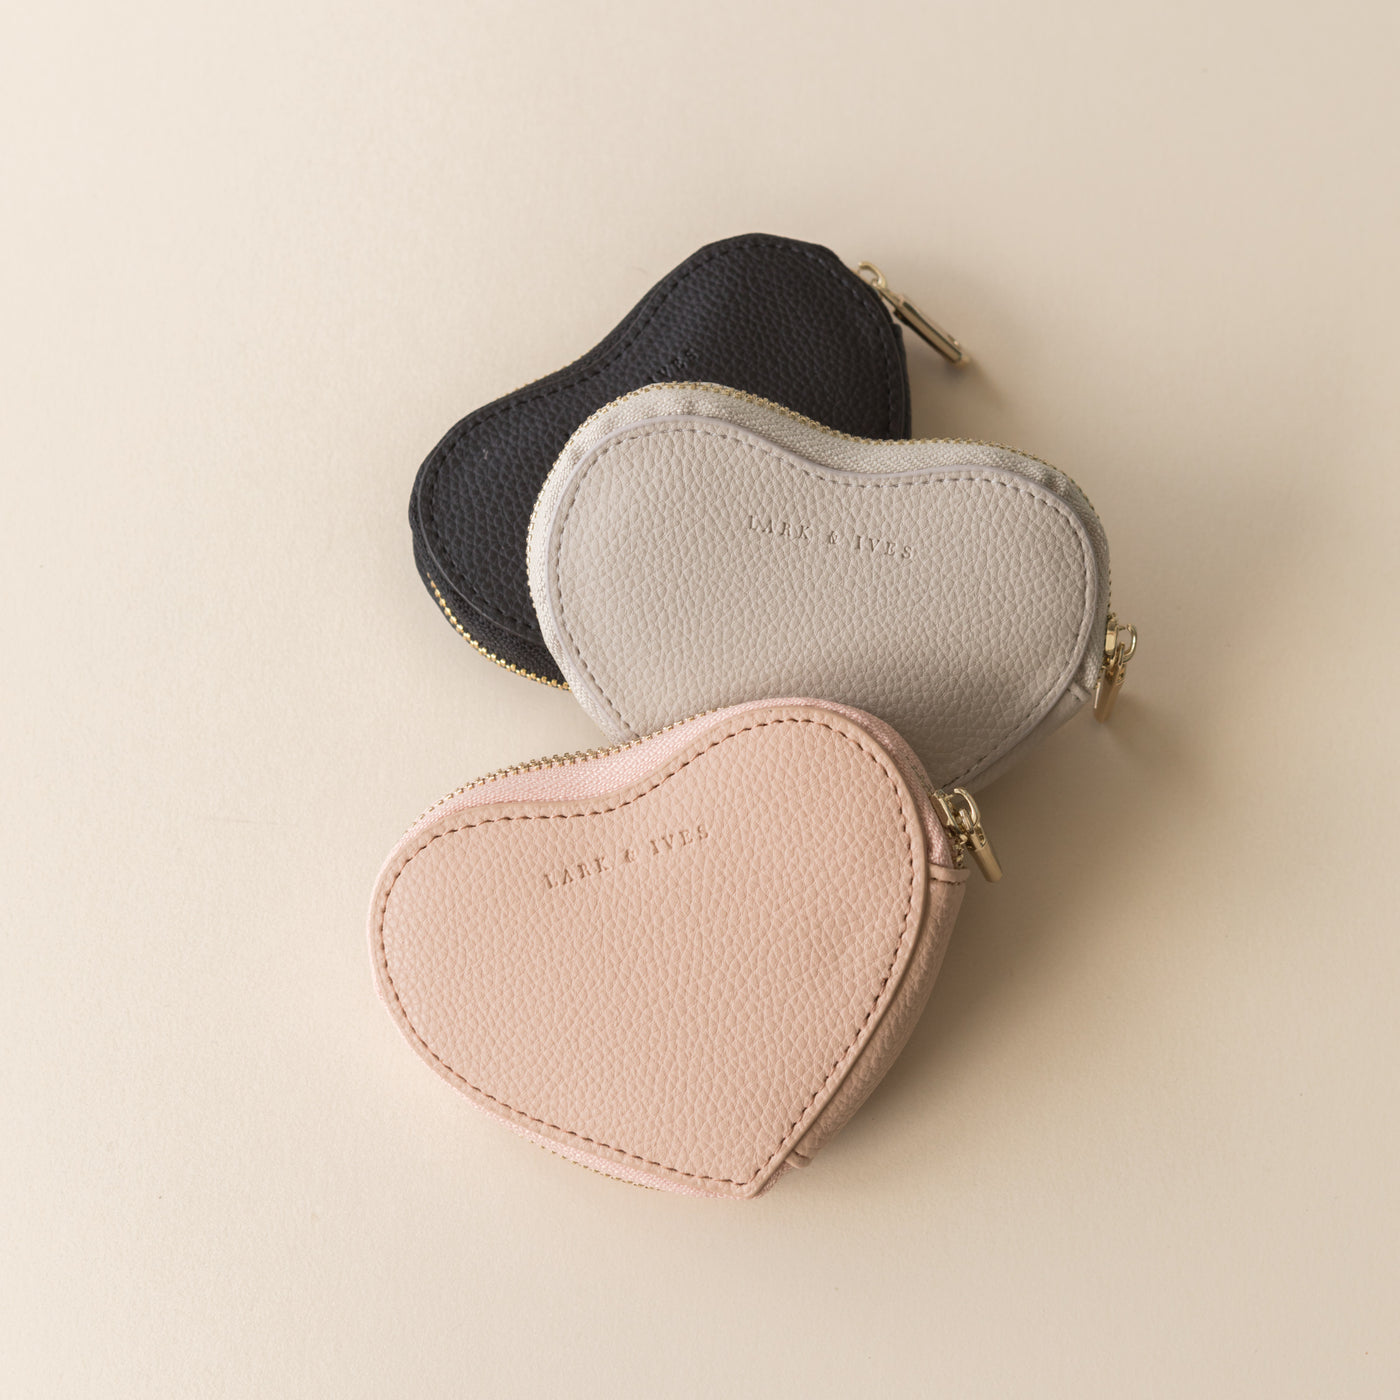 Claudia Canova heart shaped coin purse in pale pink